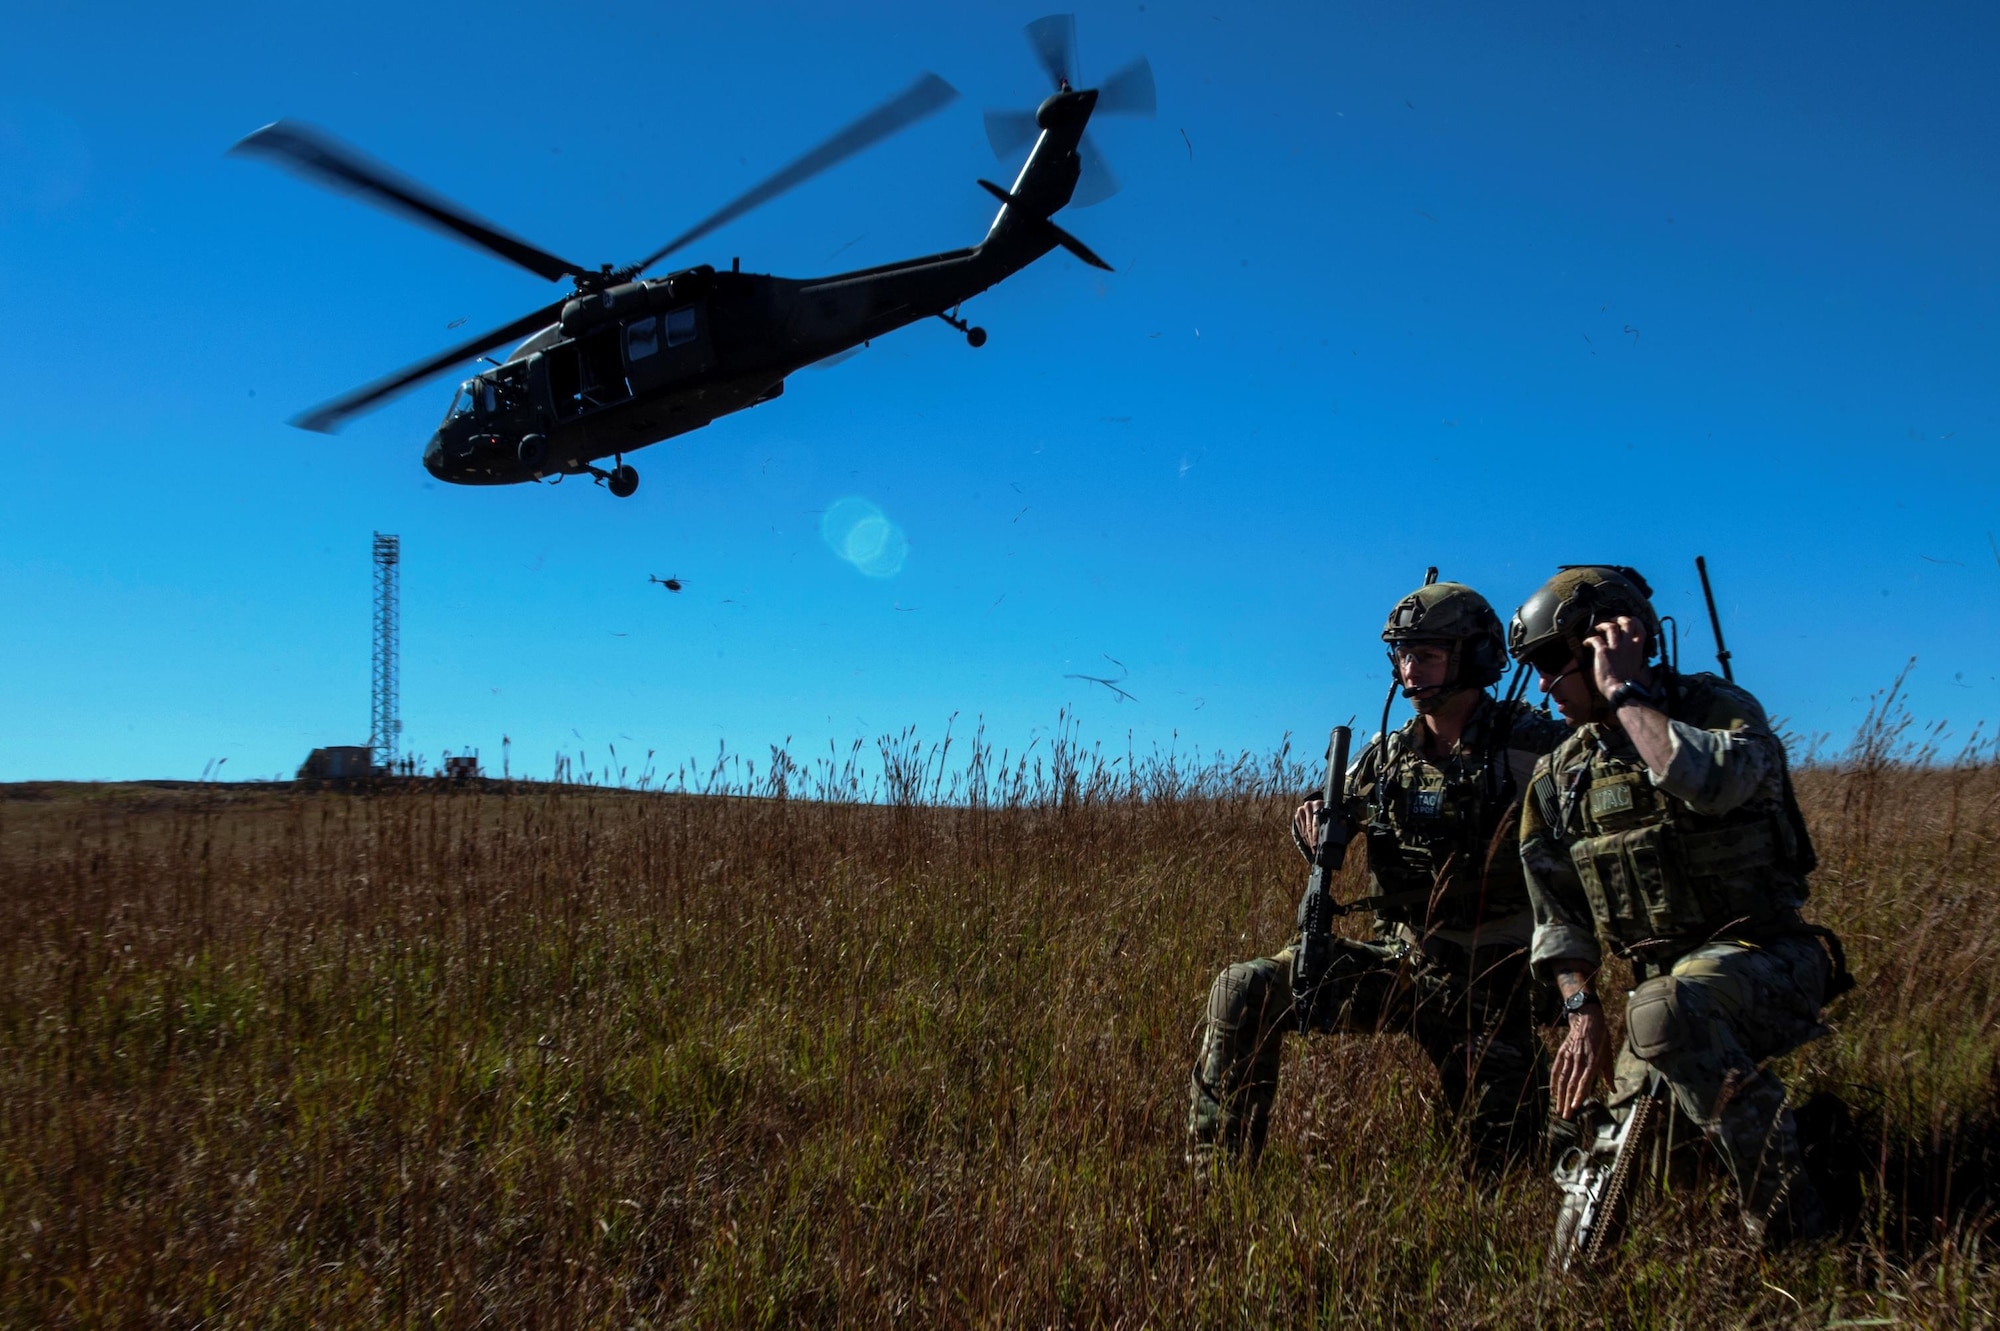 U.S. Air Force Airmen from the 17 Special Tactics Squadron out of Fort Benning, Georgia, control airspace operations, during Exercise Jaded Thunder Oct. 29, 2014 in Salina, Kansas. Joint special operations forces, including the U.S. Air Force's 17th Special Tactics Squadron, are training together in Exercise Jaded Thunder to ensure high proficiency for deployment requirements. The 17th STS of the 24th Special Operations Wing provides precision air strikes for join ground special operation forces. (U.S. Air Force photo by Senior Airman James Richardson)